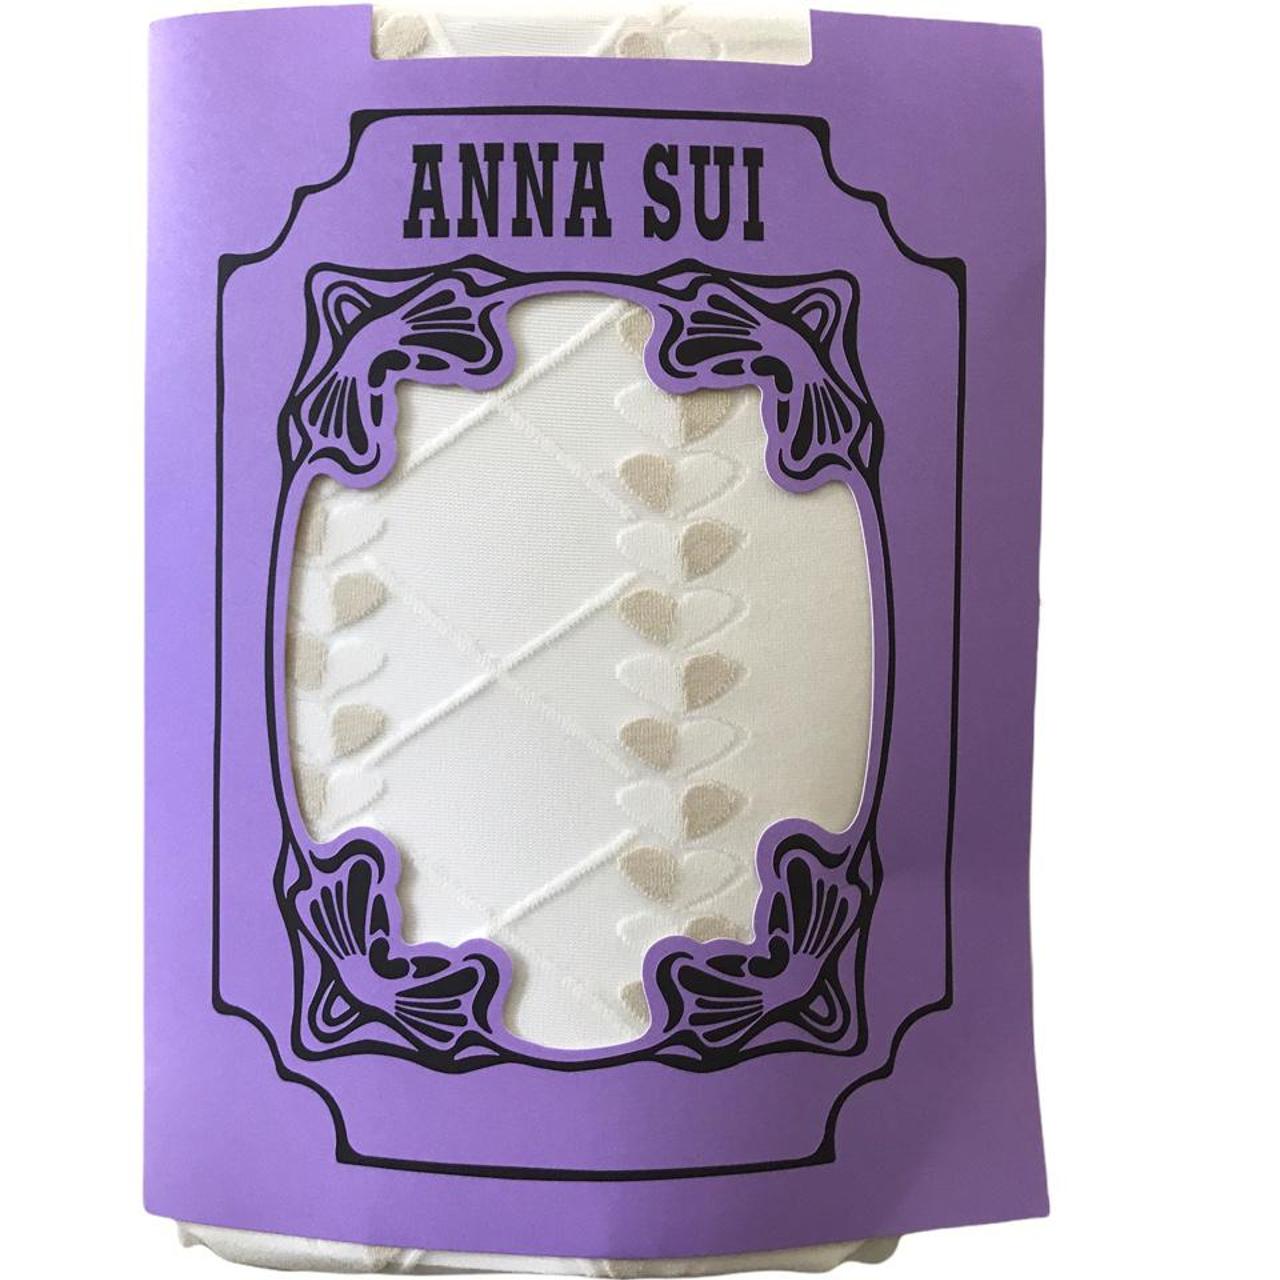 Product Image 1 - Anna Sui heart tights
Cream lace